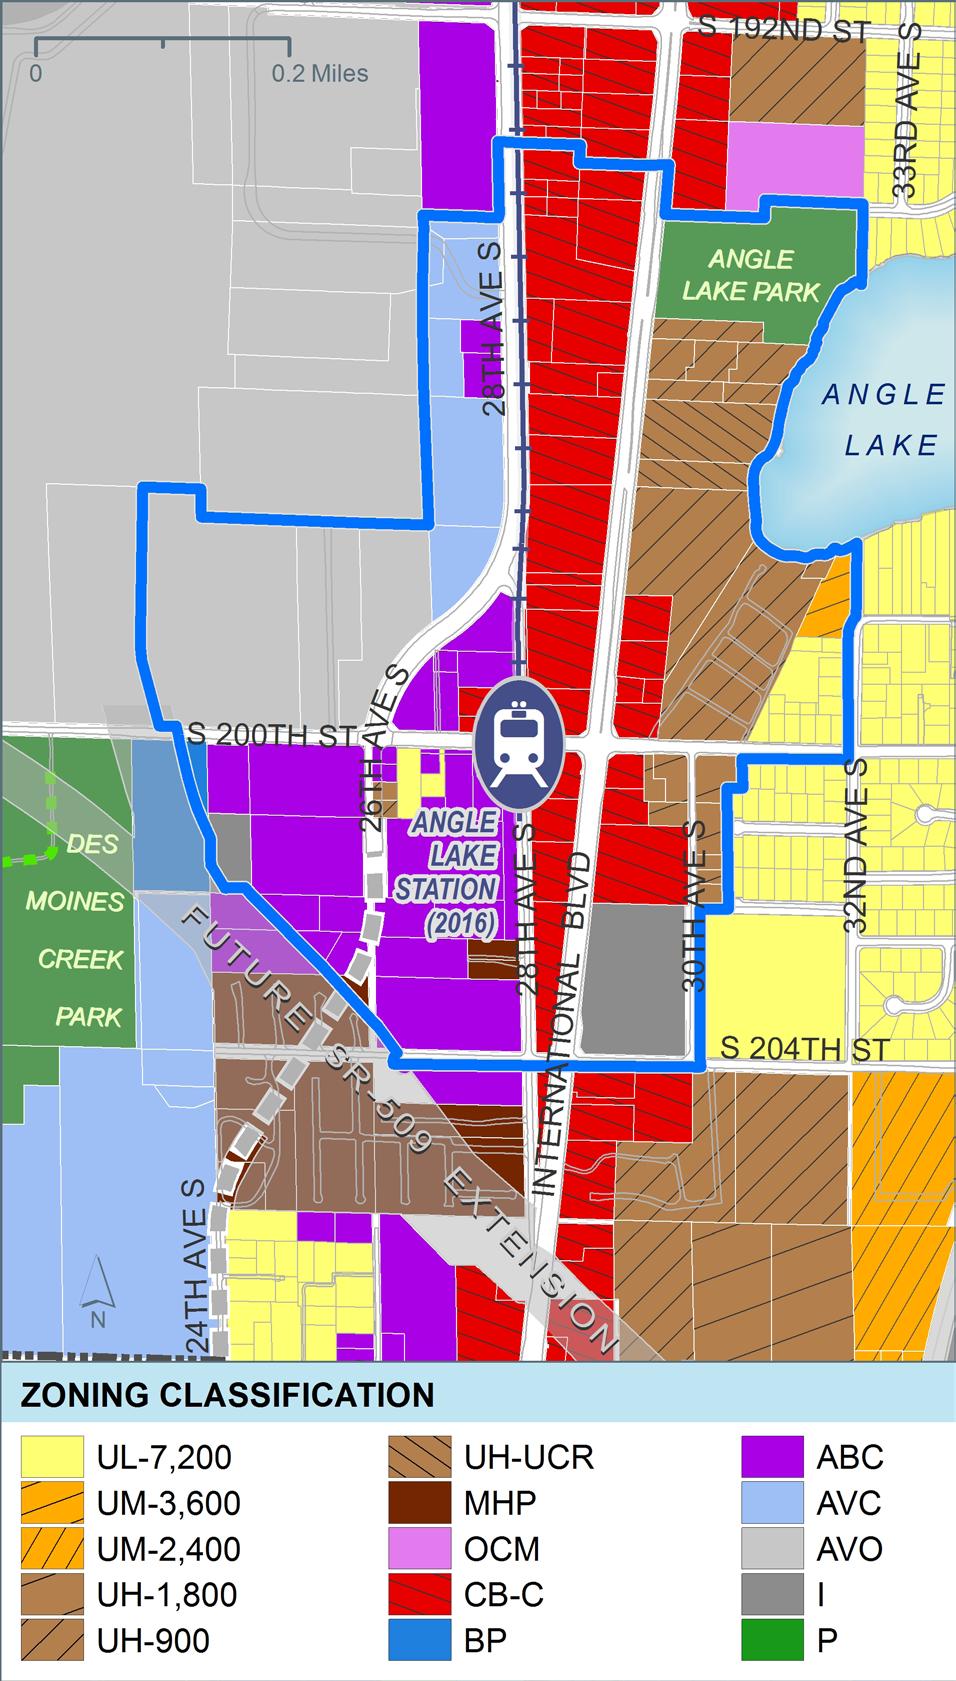 APPENDICES APPENDIX C: CURRENT ZONING Zoning in the District includes the following categories: FIGURE C-1: CURRENT ZONING Commercial Community Business - Urban Center (CB-C) Aviation Business Center